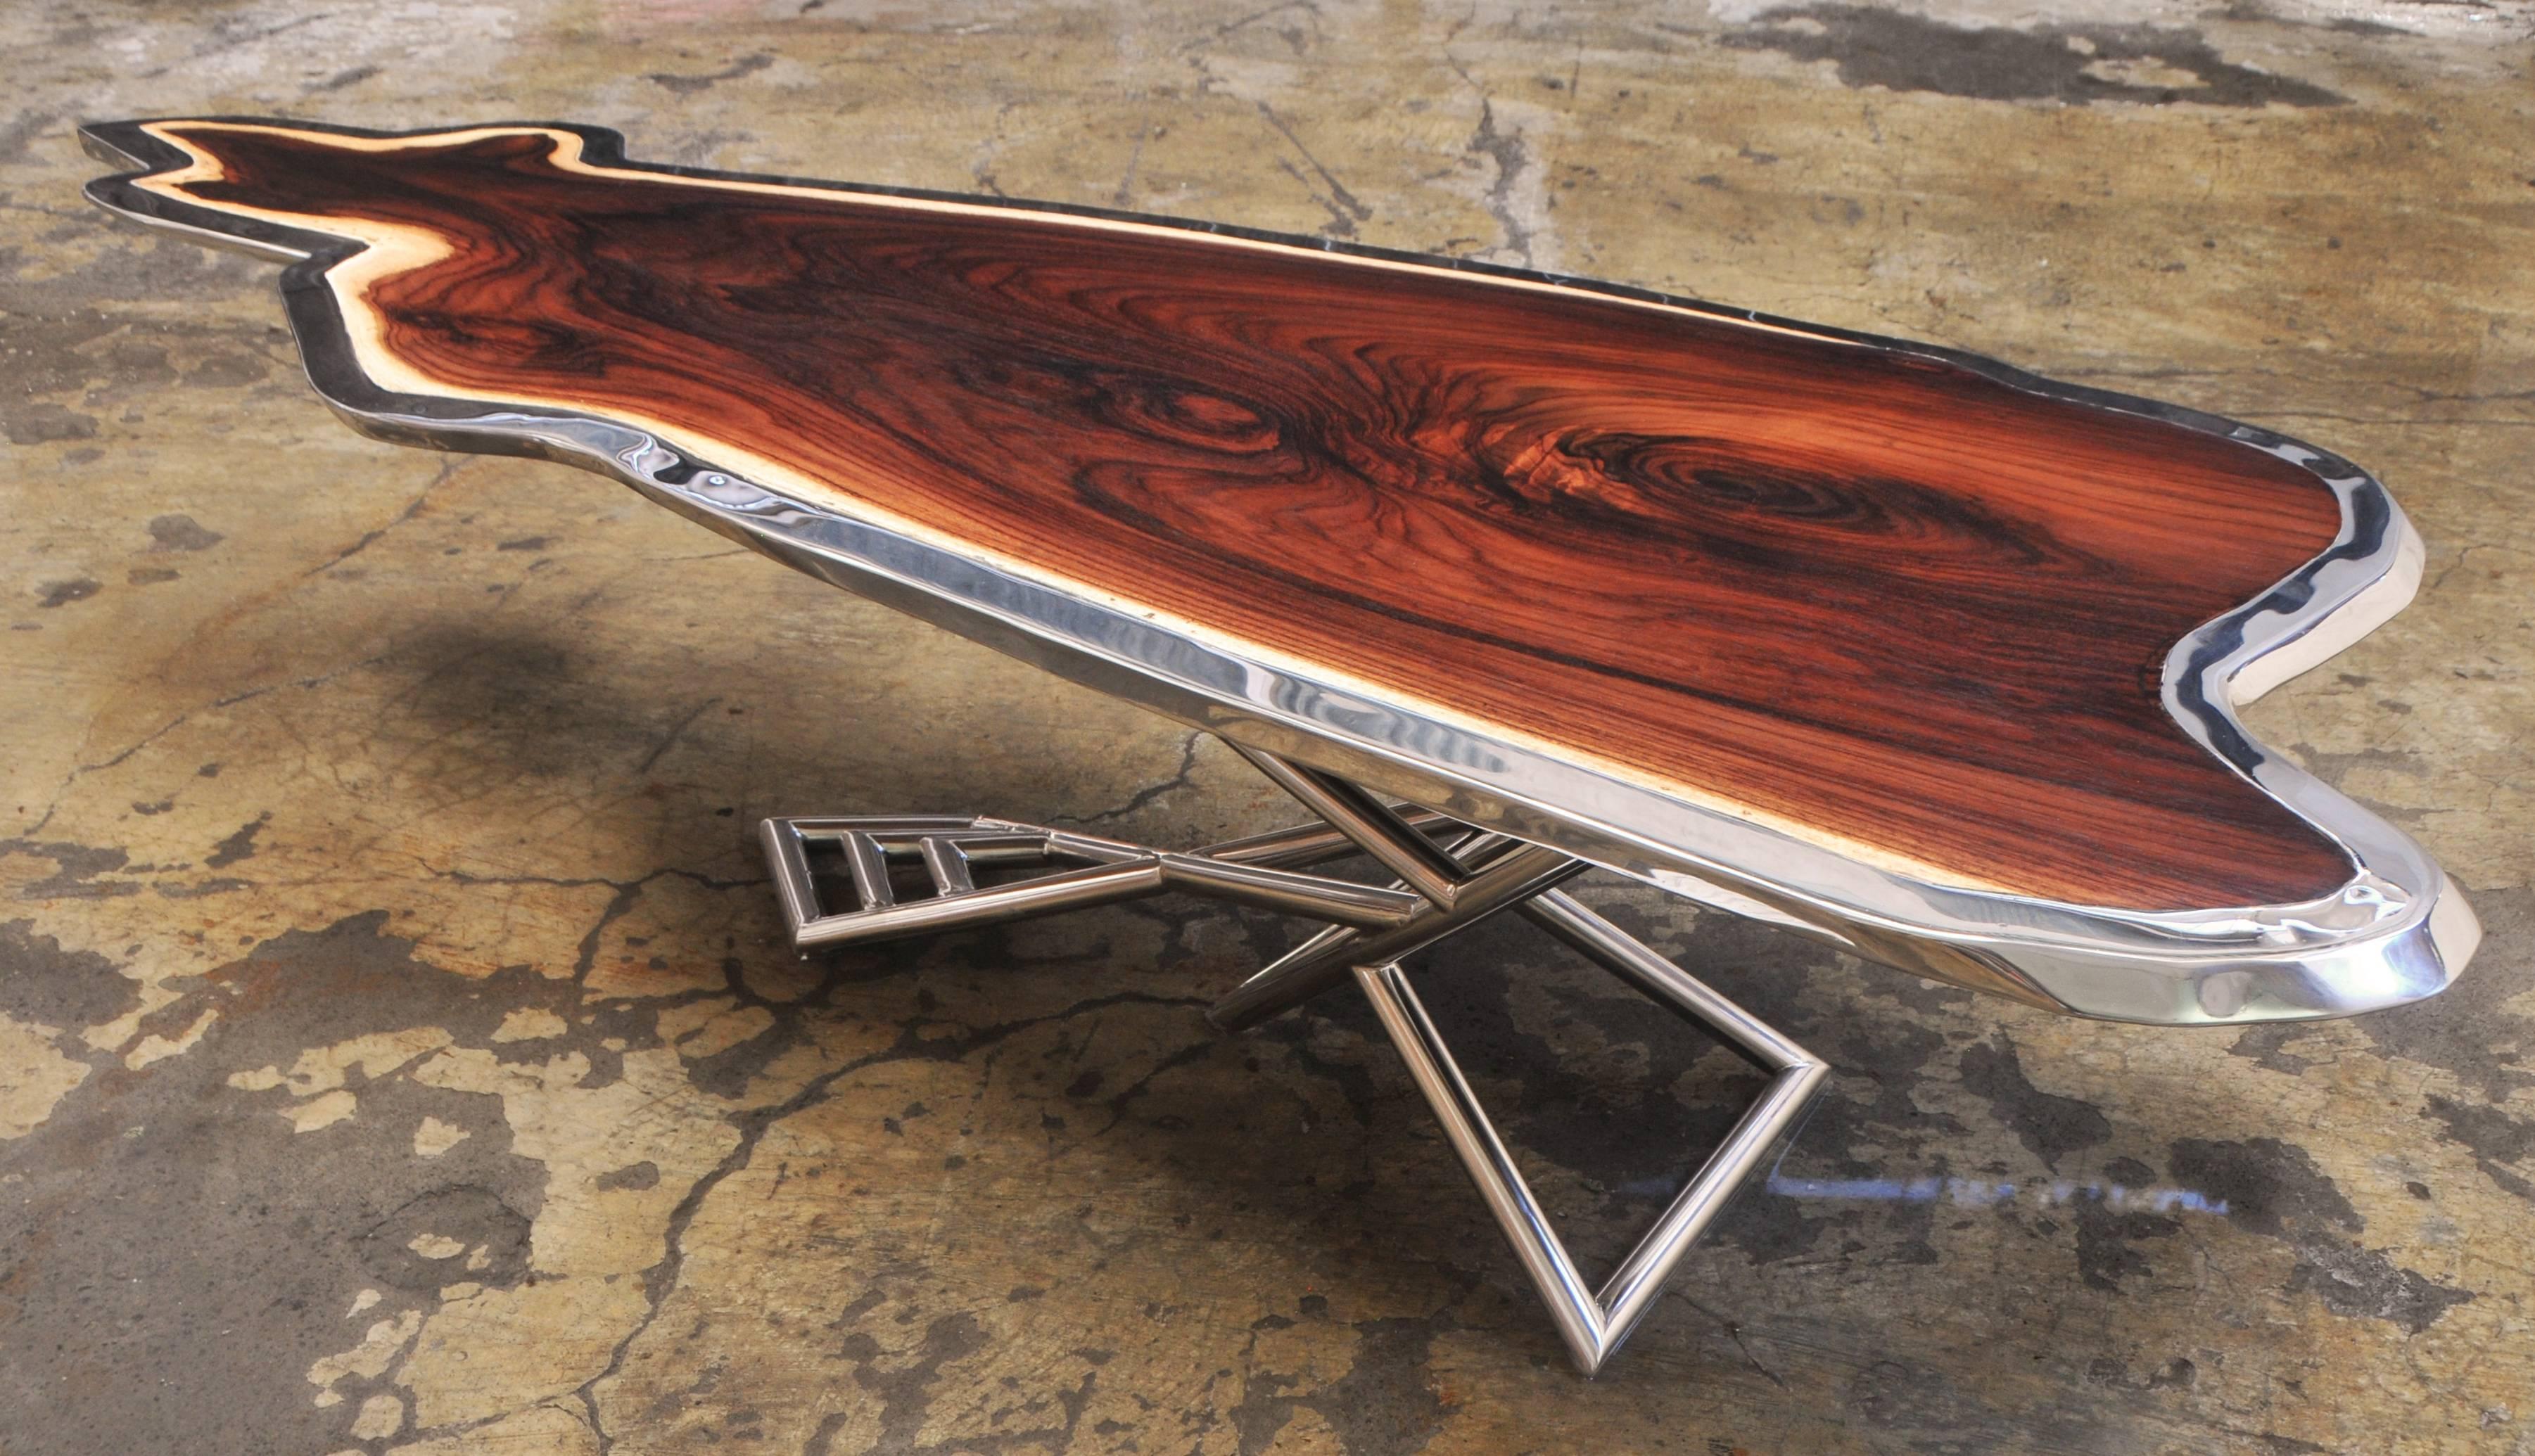 Unique coffee table made with rosewood and mirror polished stainless steel. This piece has an image of a kangaroo shaped by nature. The stainless steel lining perfectly enhanced the kangaroo shape.

Designed by Bruno Helgen and manufactured in his